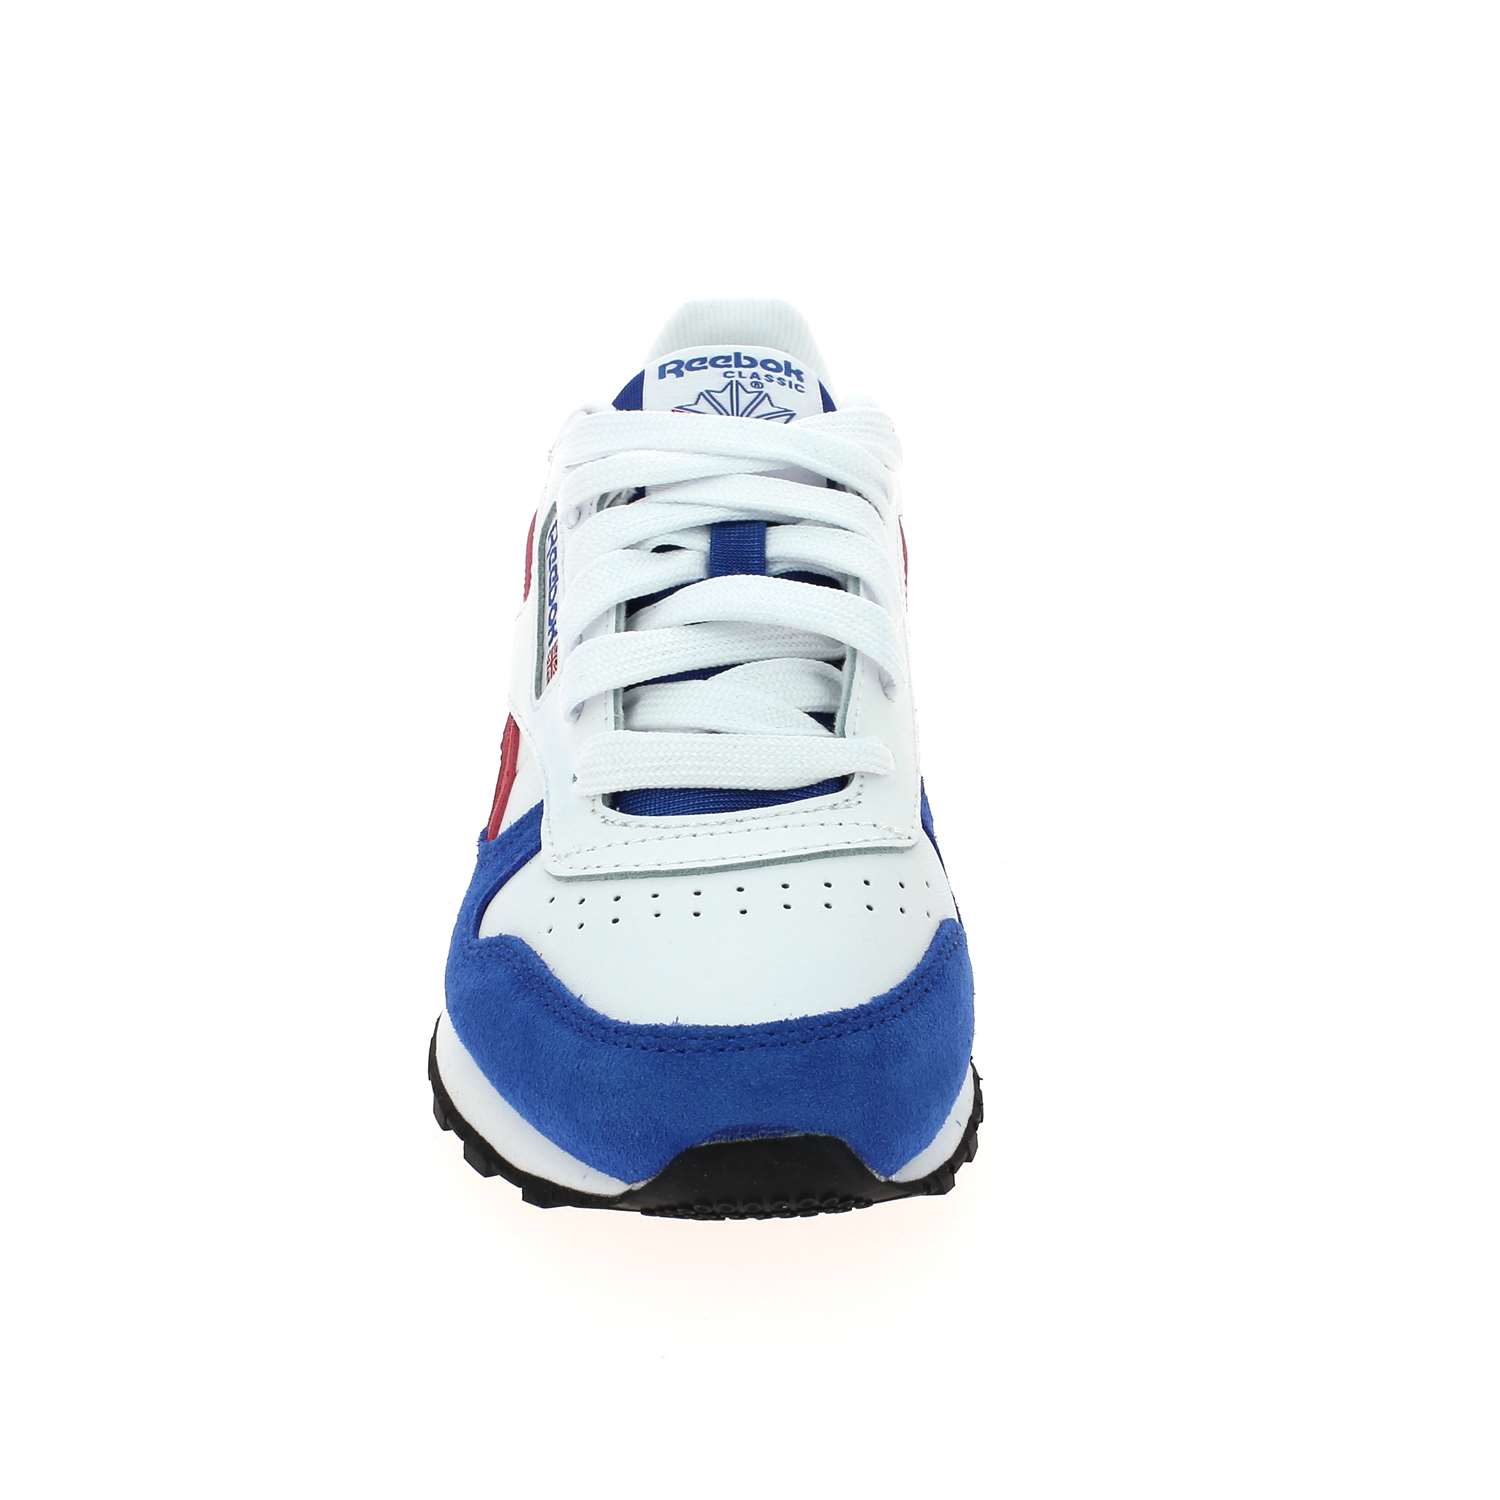 3 - CLASSIC LEATHER - REEBOK - Baskets - Synthétique, Textile, Cuir